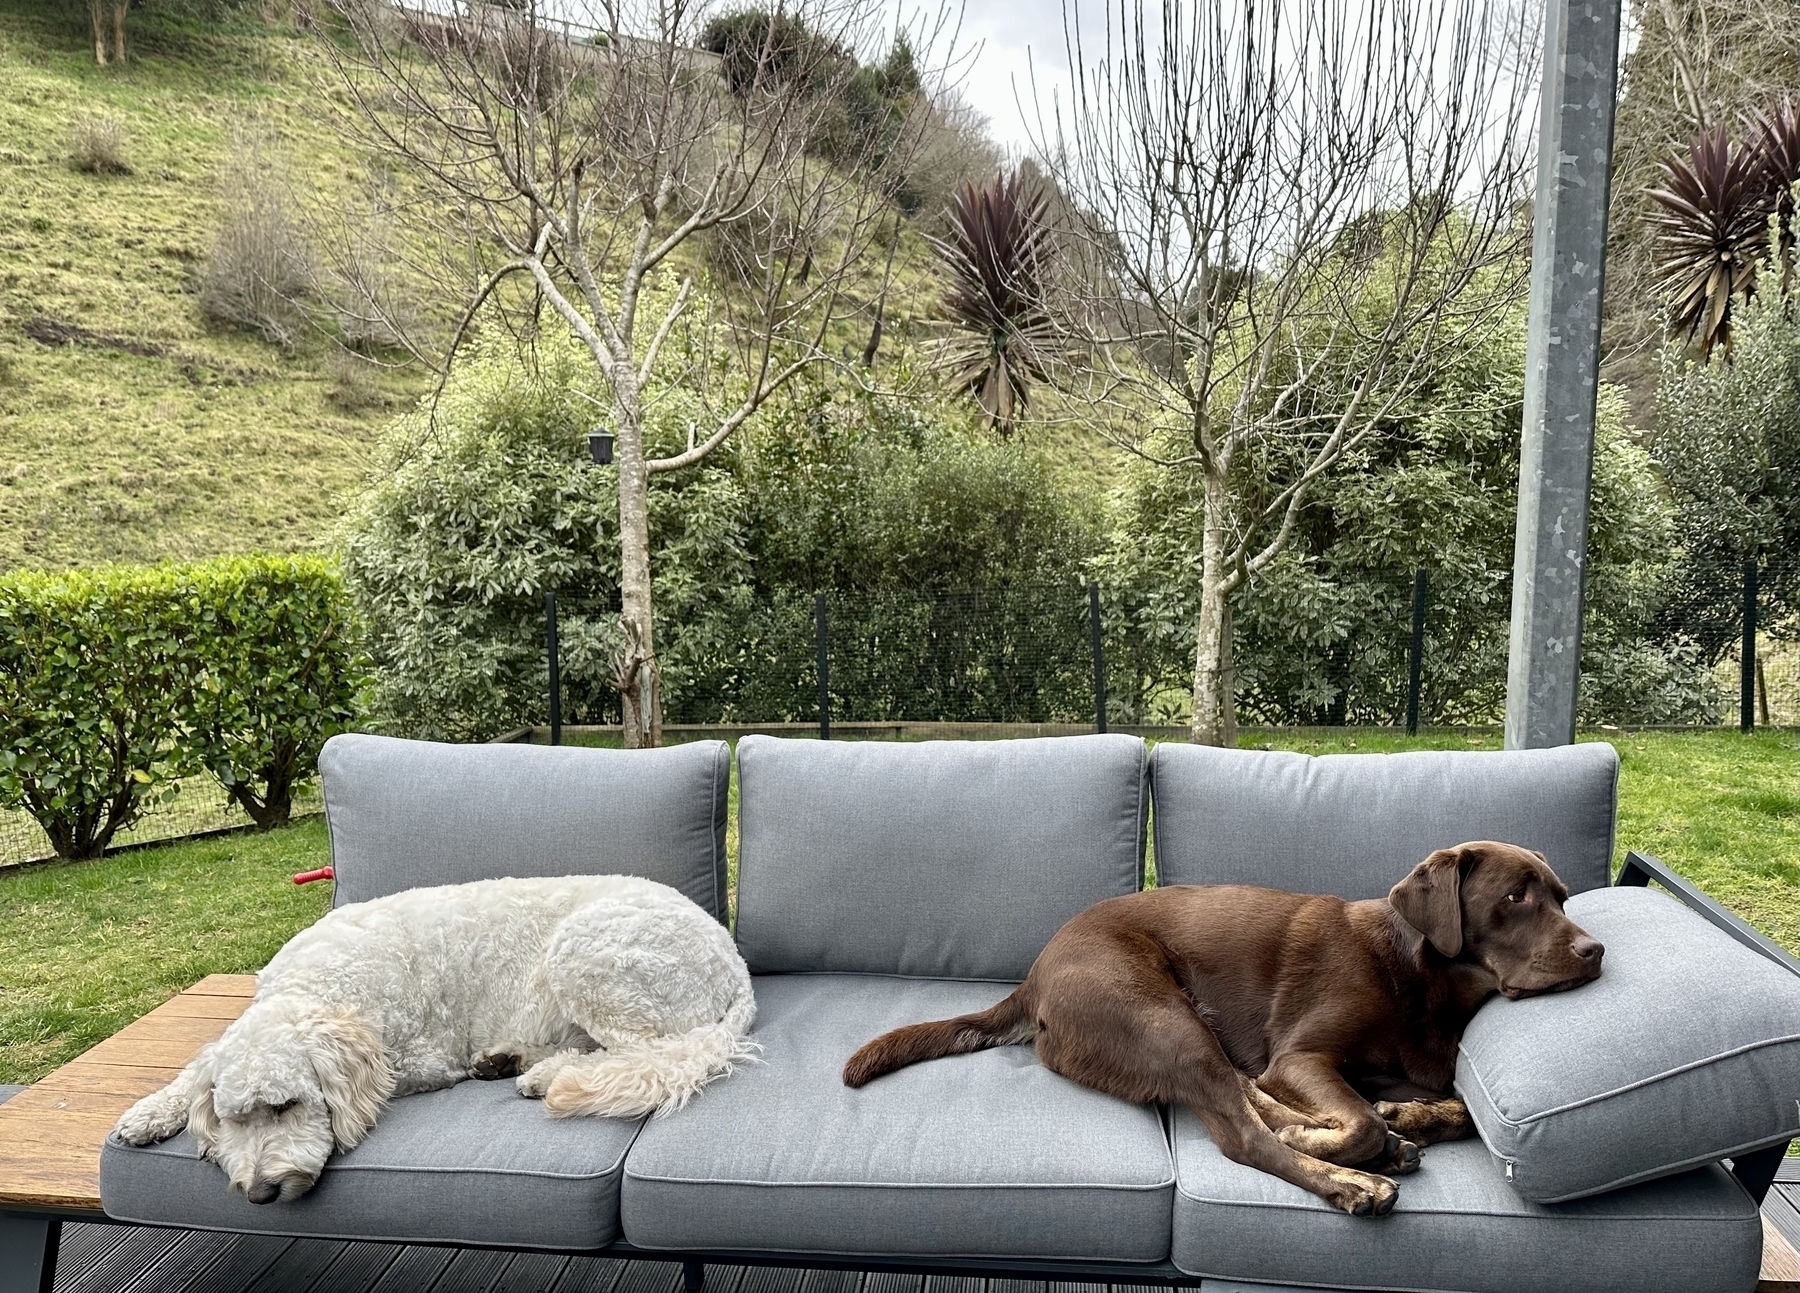 Two dogs sleeping outside on a sofa